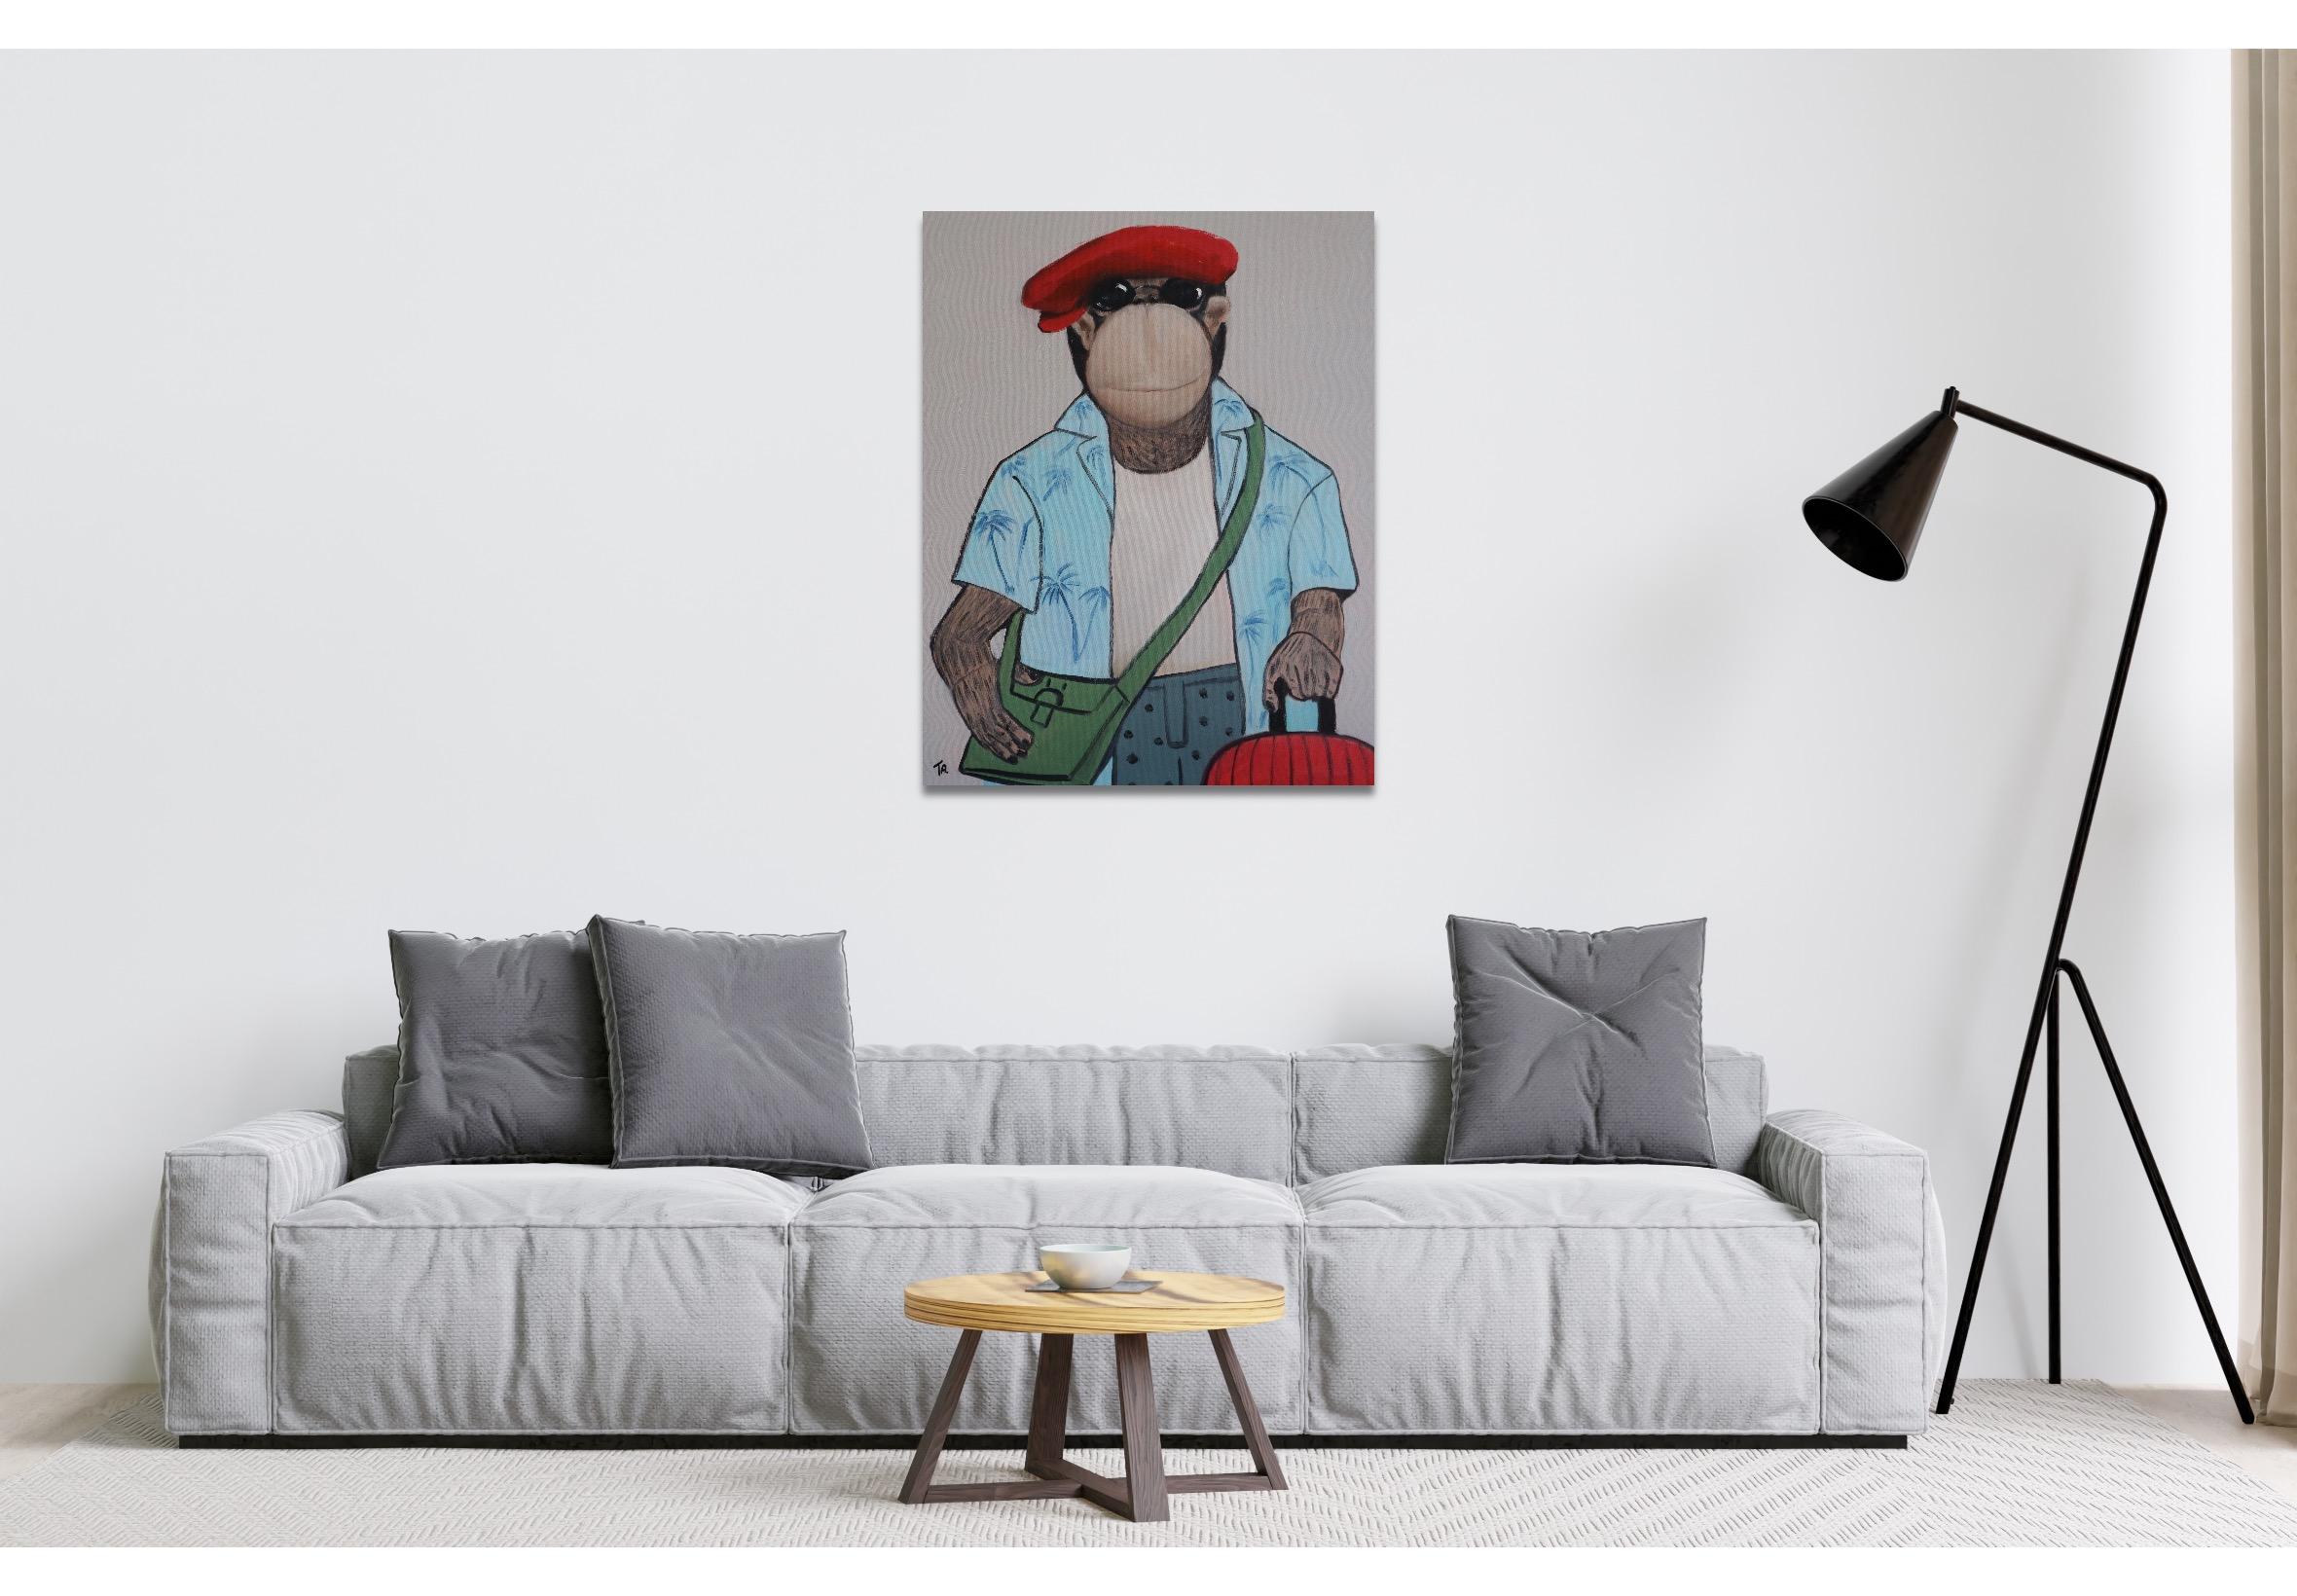 Ready to hang and free worldwide shipping.
“The longer you look at an object, the more abstract it becomes, and, ironically, the more real.” Lucian Freud 

I want my art to be unpredictable and refreshing; the paintings that I create are meant to